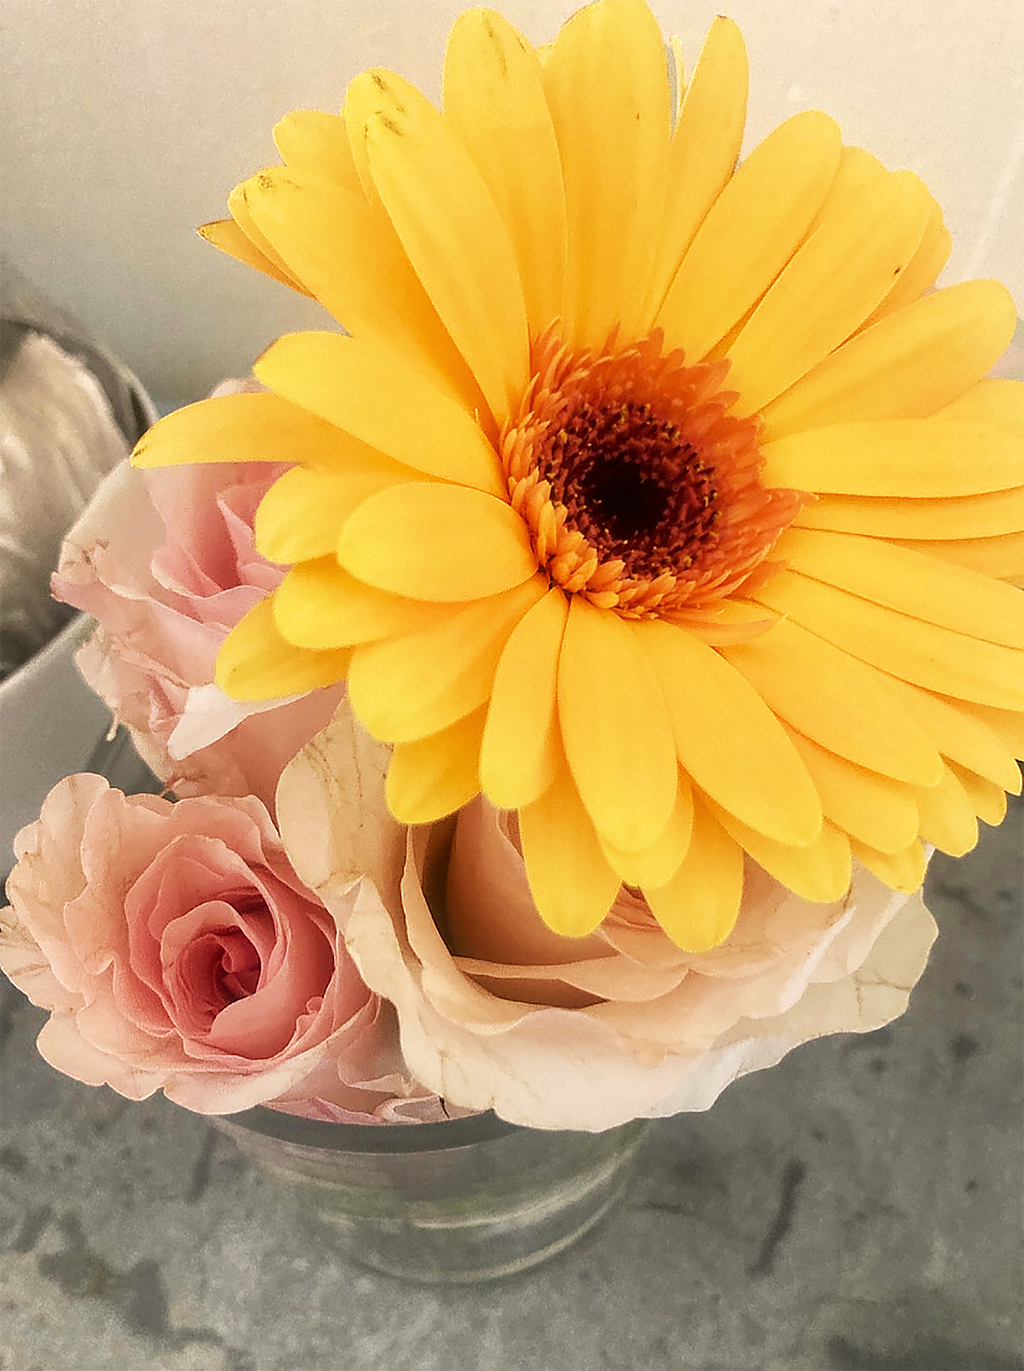 An arrangement of yellow Gerbera daisy and pale pink roses in a vase.